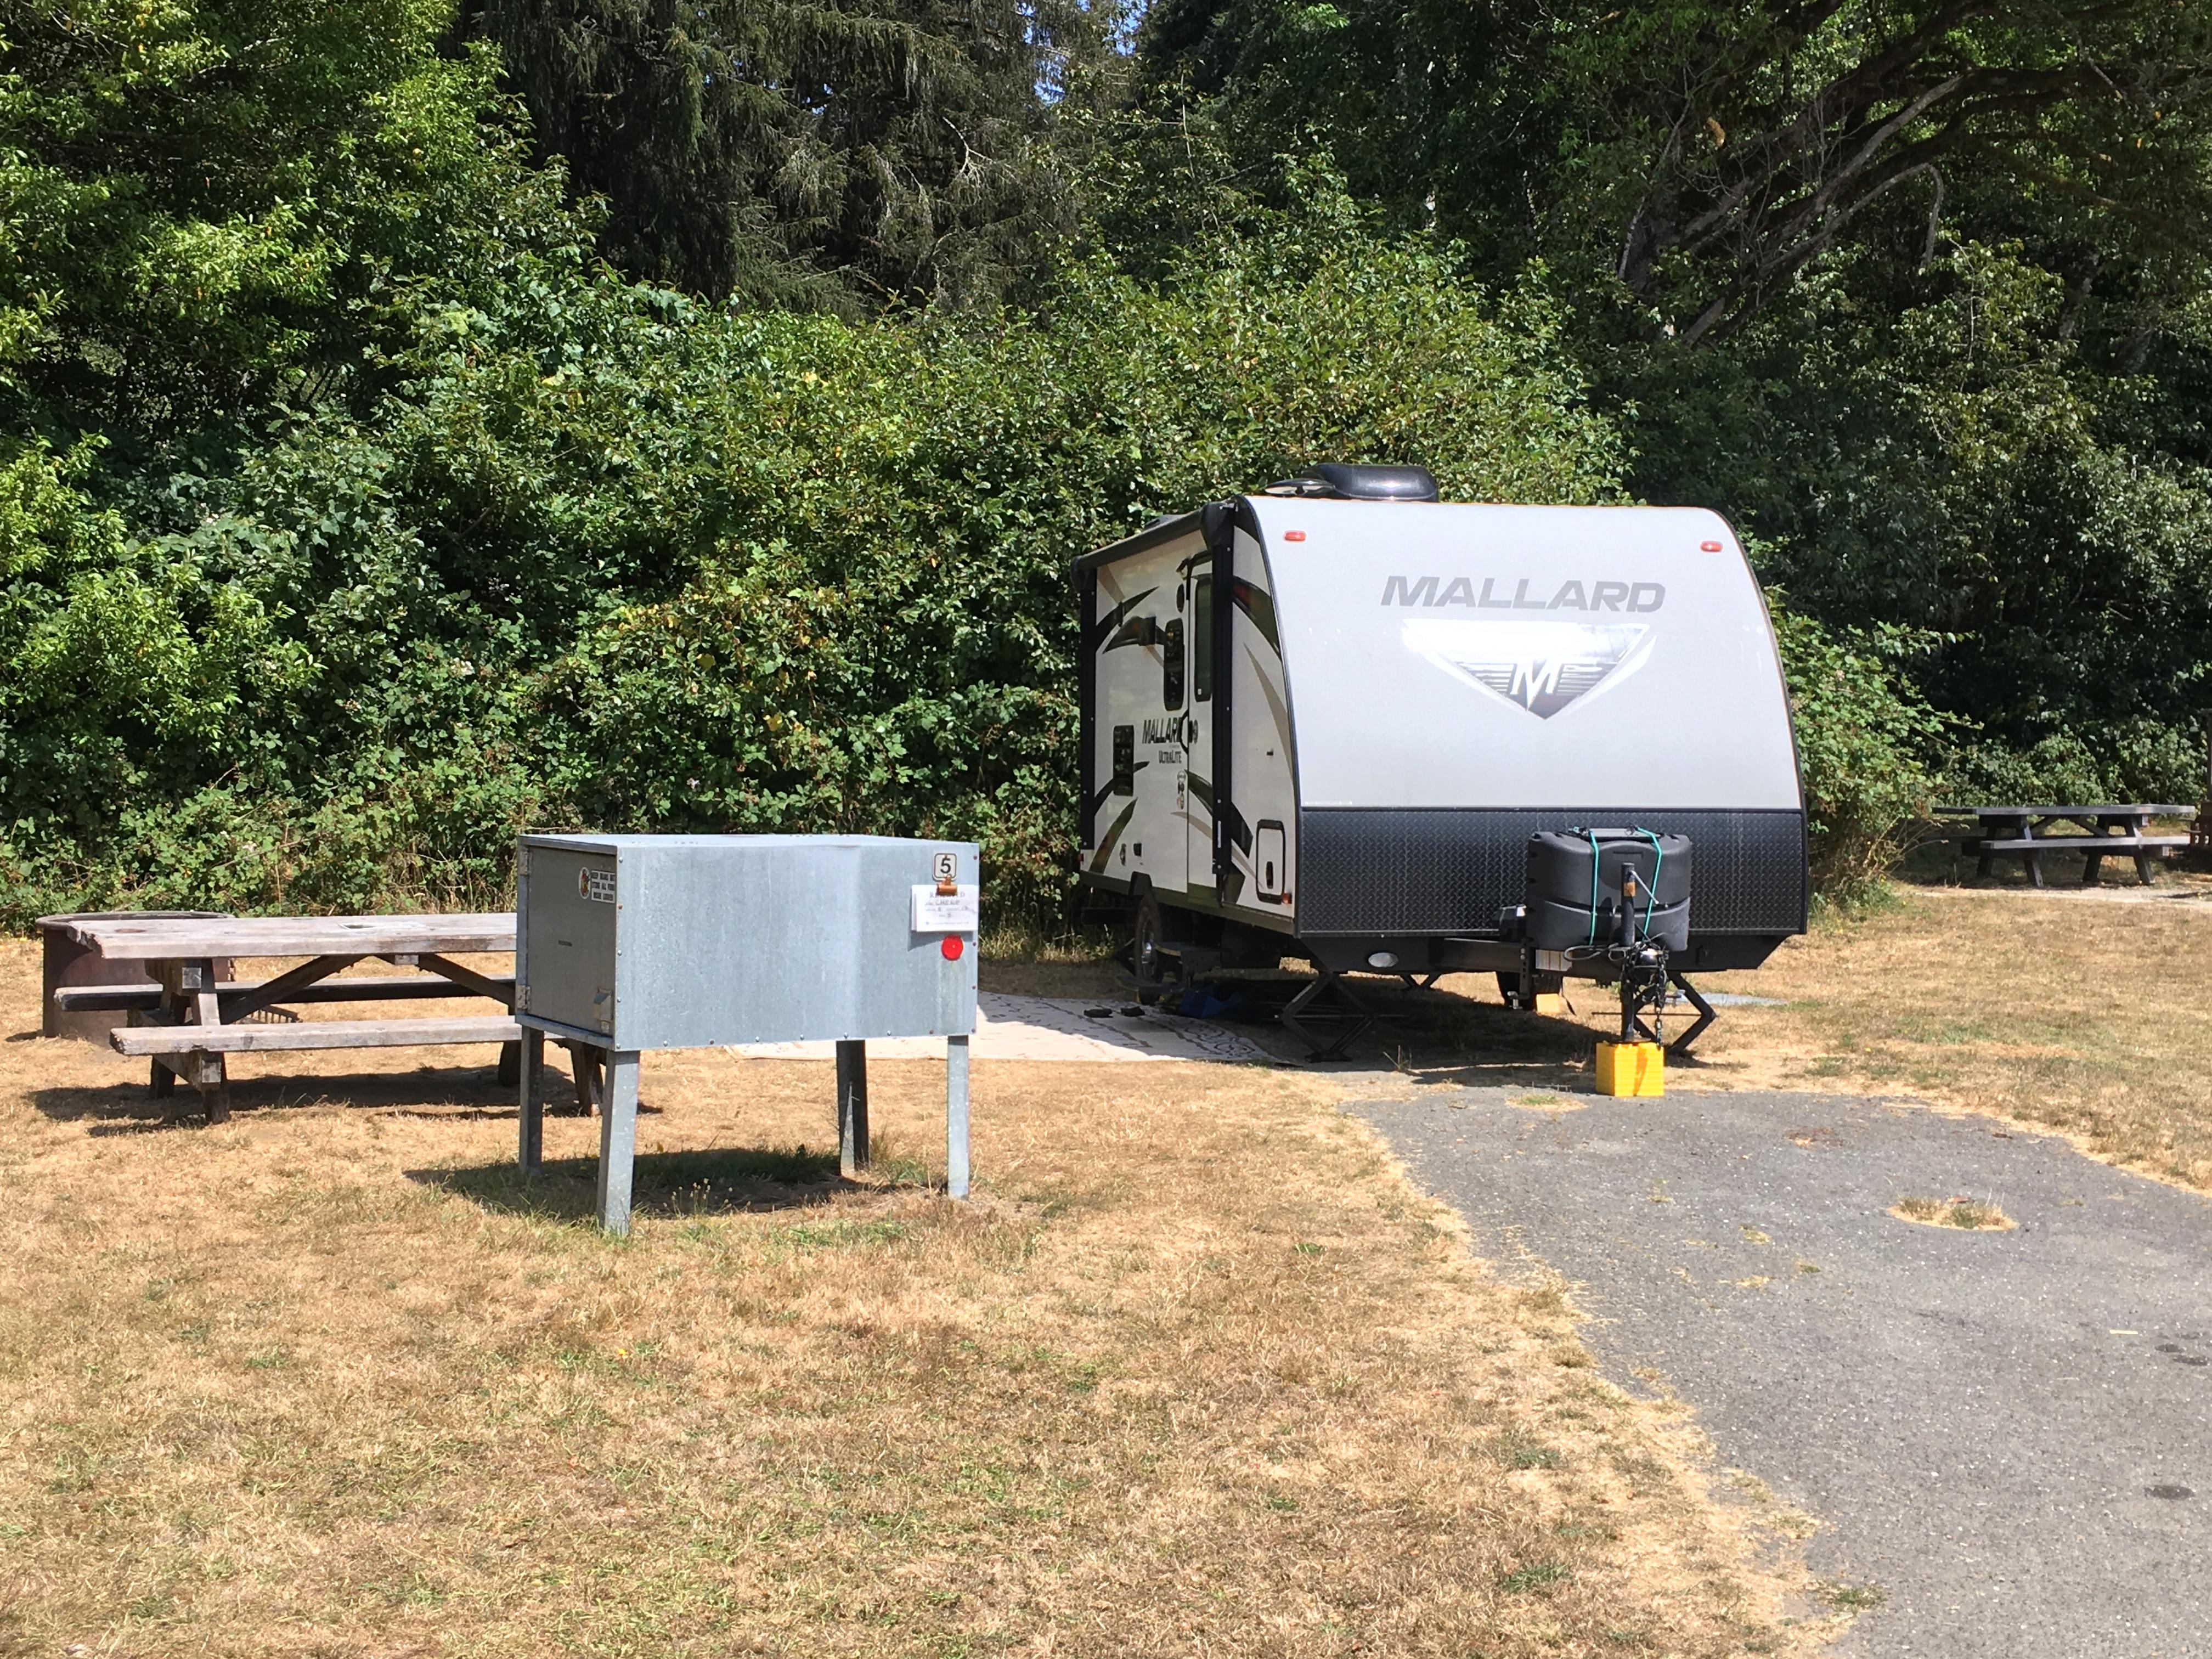 A trailer, picnic table and bear-proof storage box.